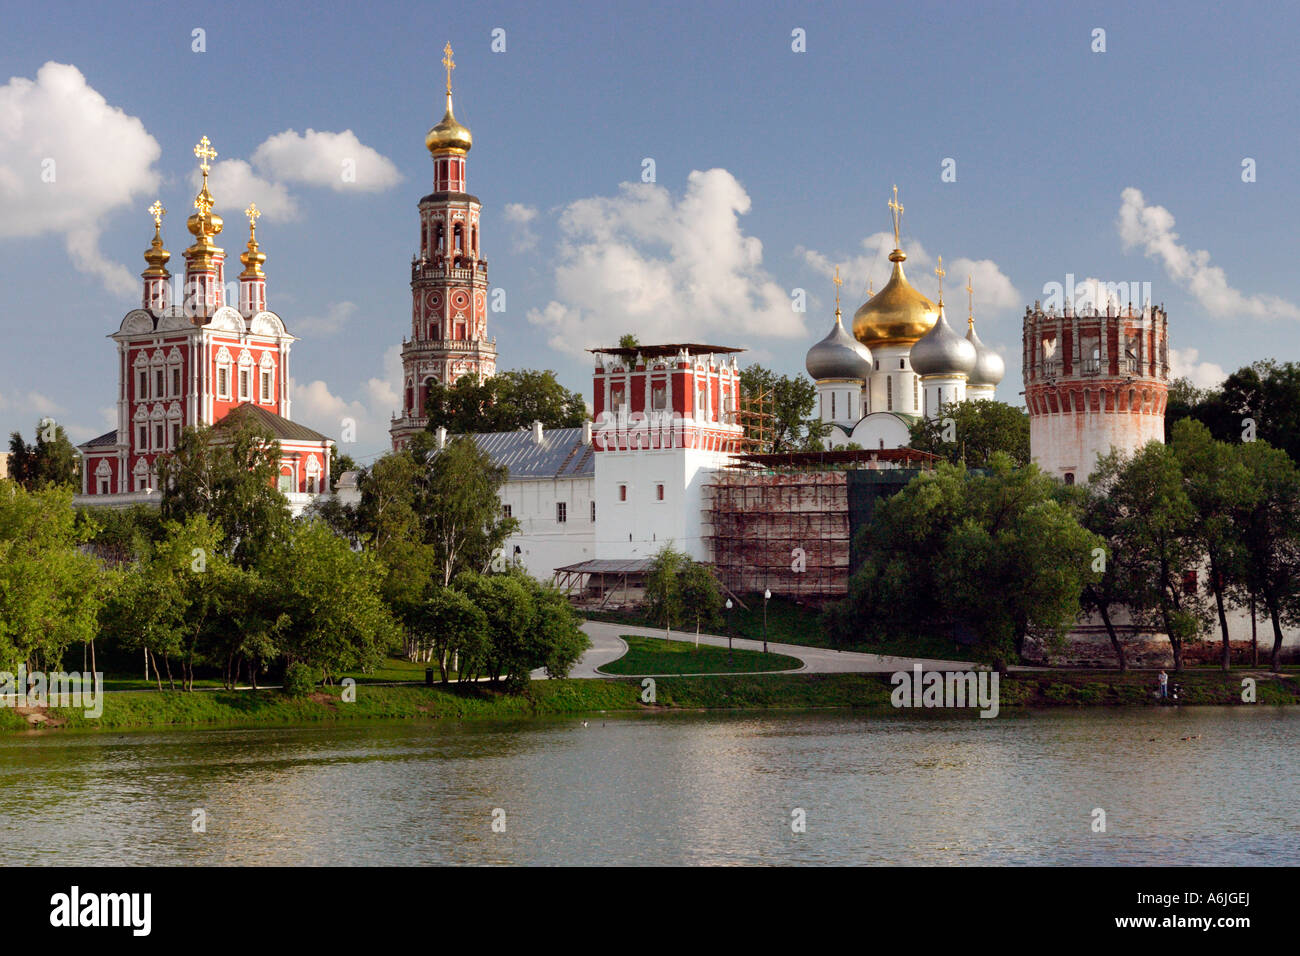 The New Virgin Nunnery, Moscow, Russia Stock Photo